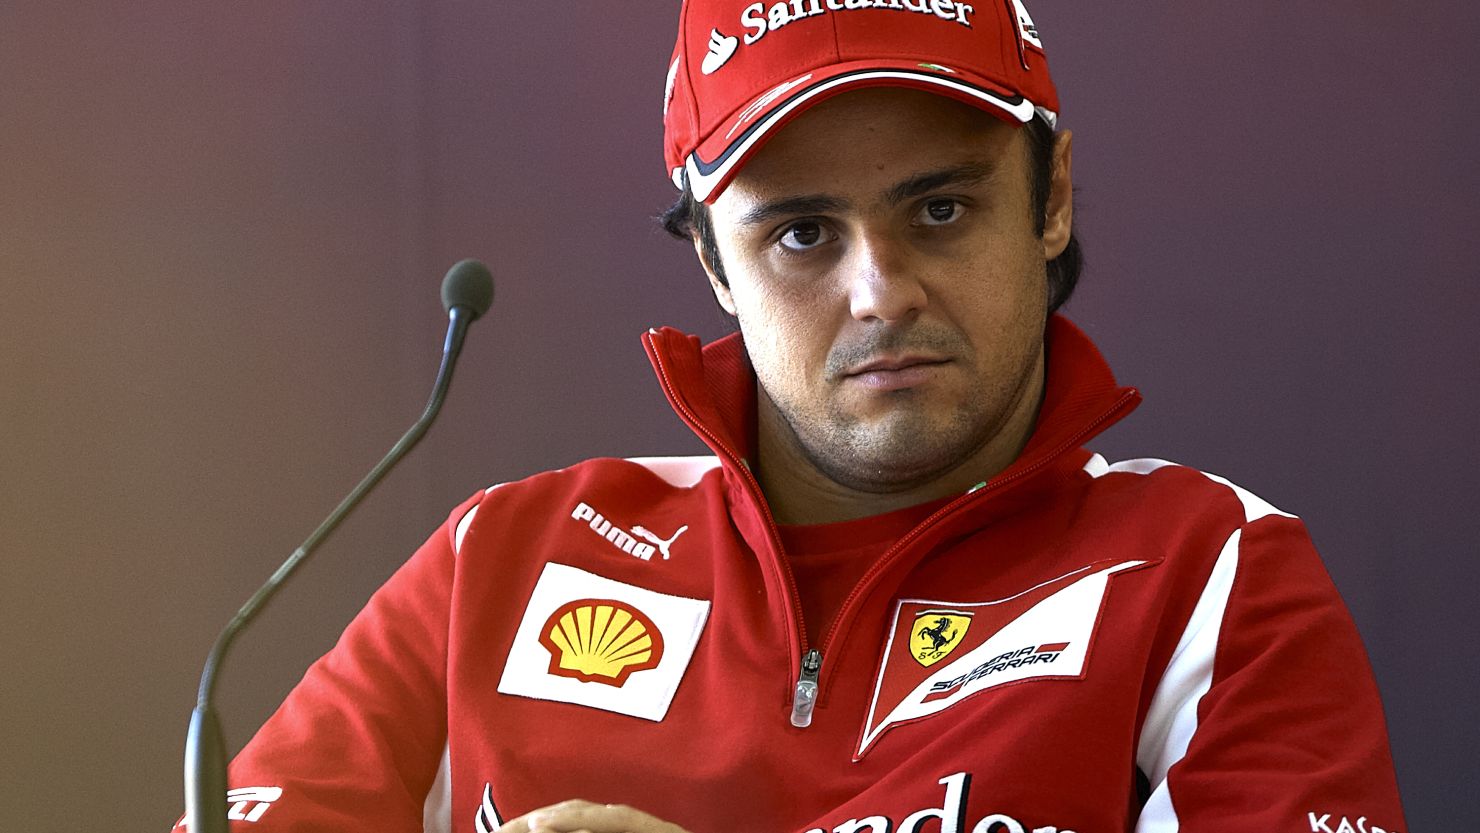 Felipe Massa has spent seven years with Ferrari but will be driving for Williams in the 2014 season. 